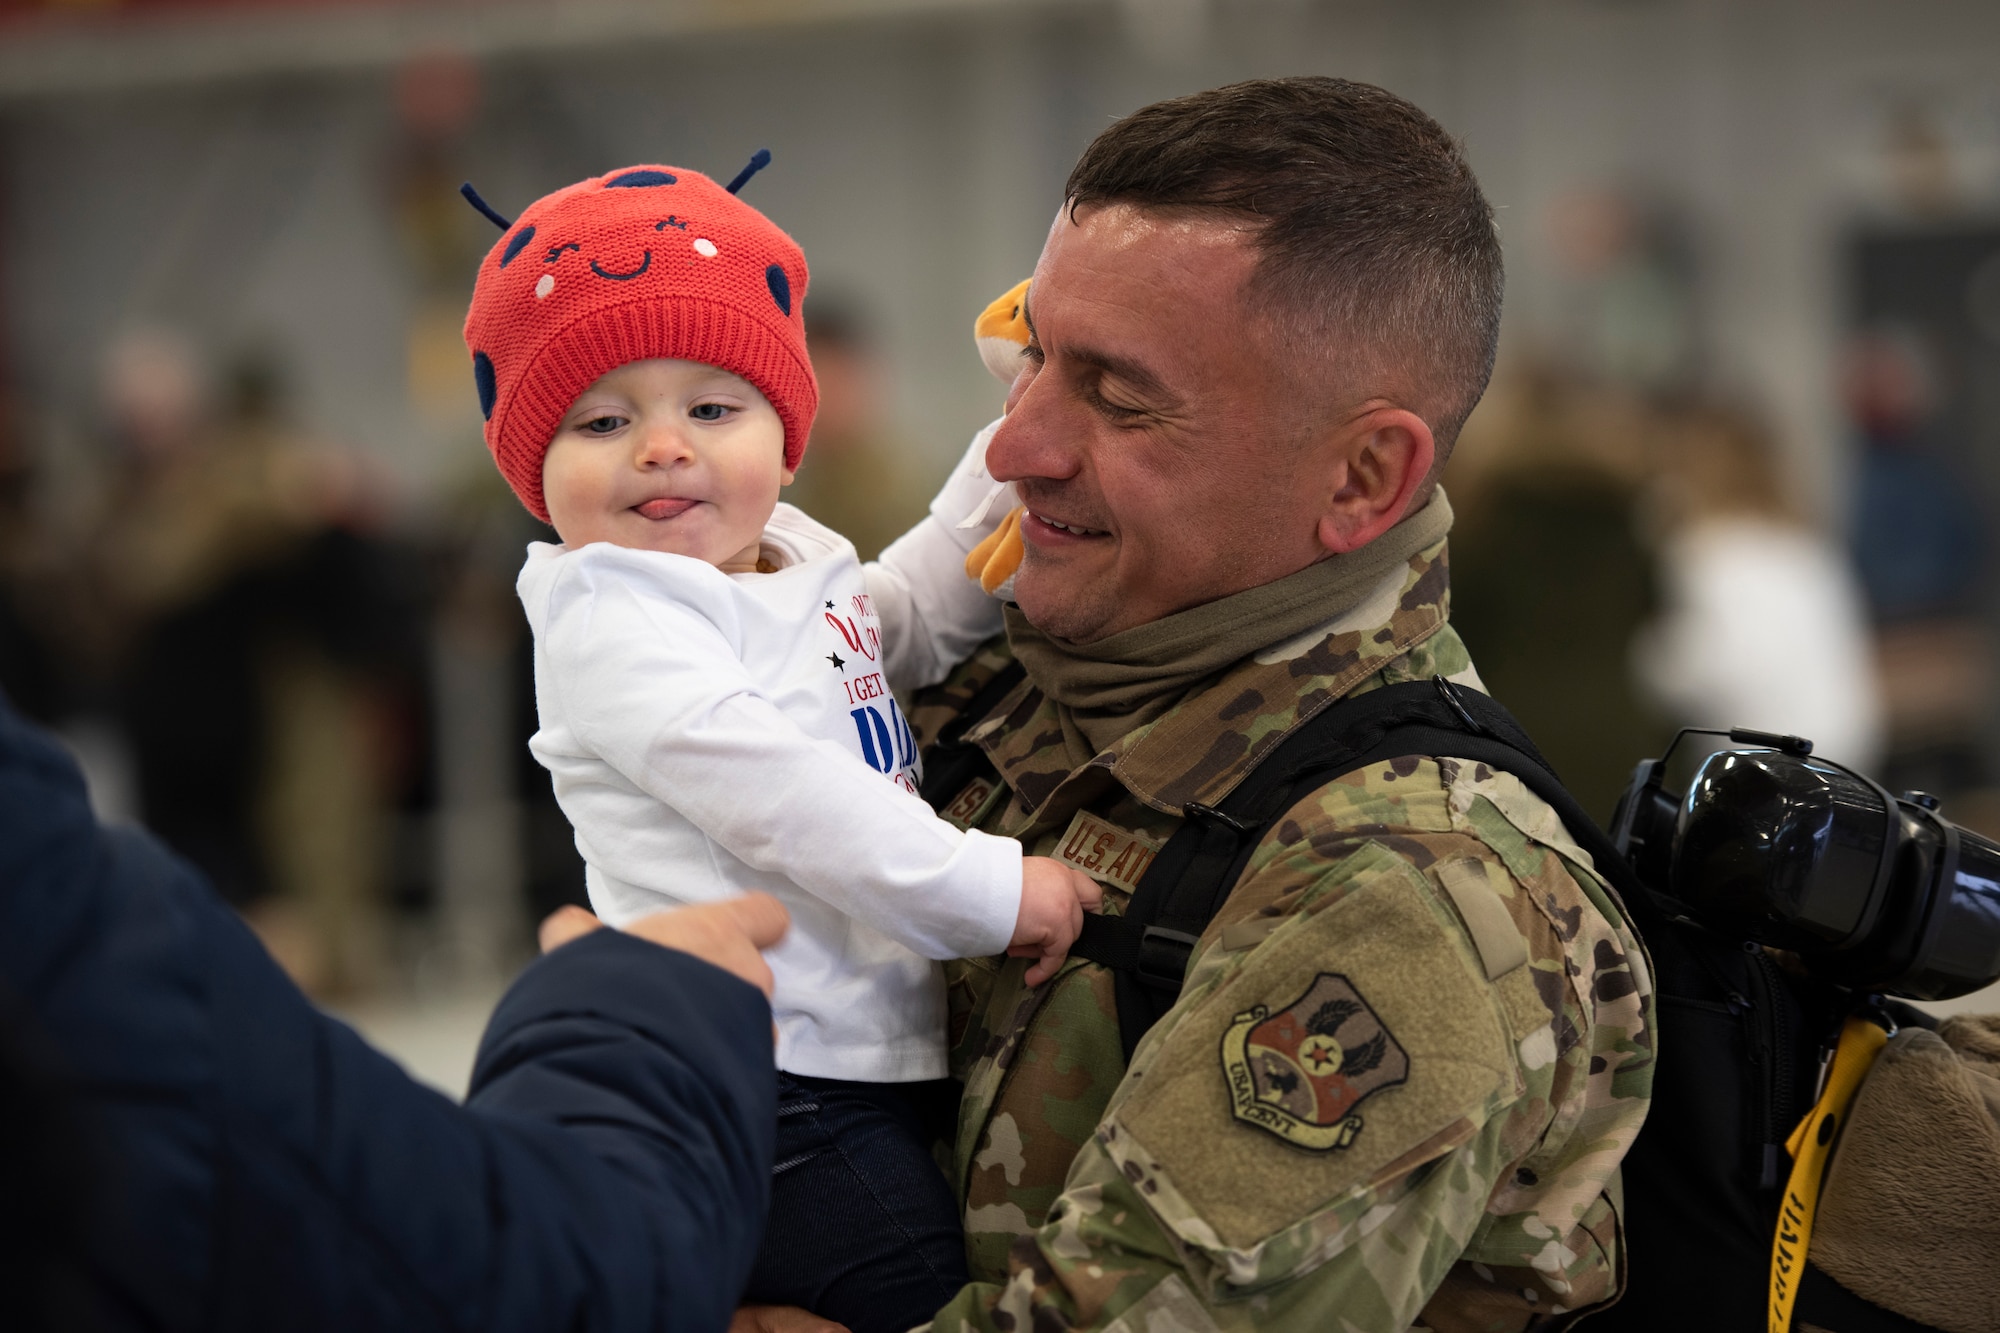 Master Sgt. David Harrison, a network systems operator, assigned to the Ohio National Guard’s 180th Fighter Wing, hold his daughter after returning home from their overseas deployment, Jan. 26, 2020 at the 180FW in Swanton, Ohio.